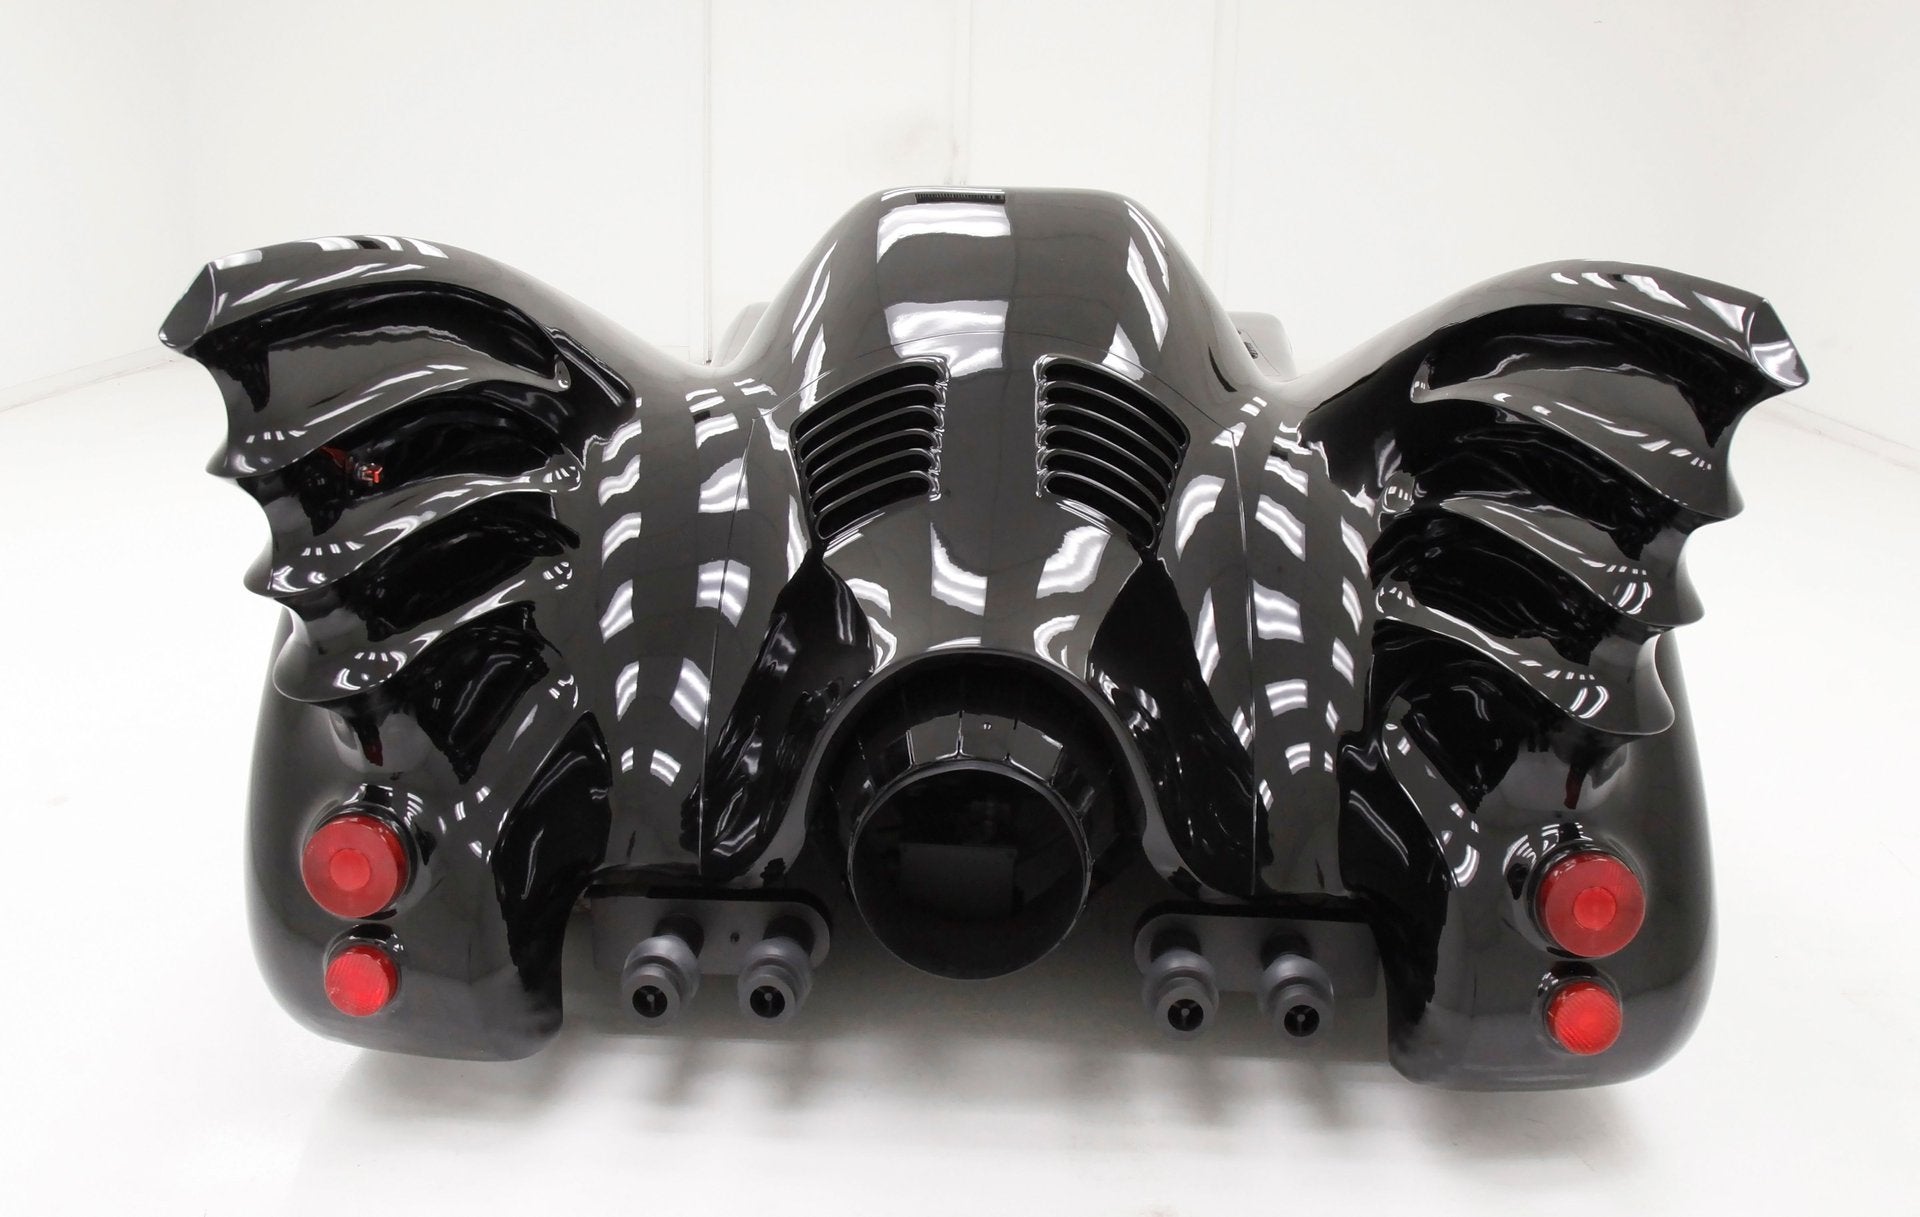 You Can Buy the Tim Burton Batmobile If You Have $2.26 Million